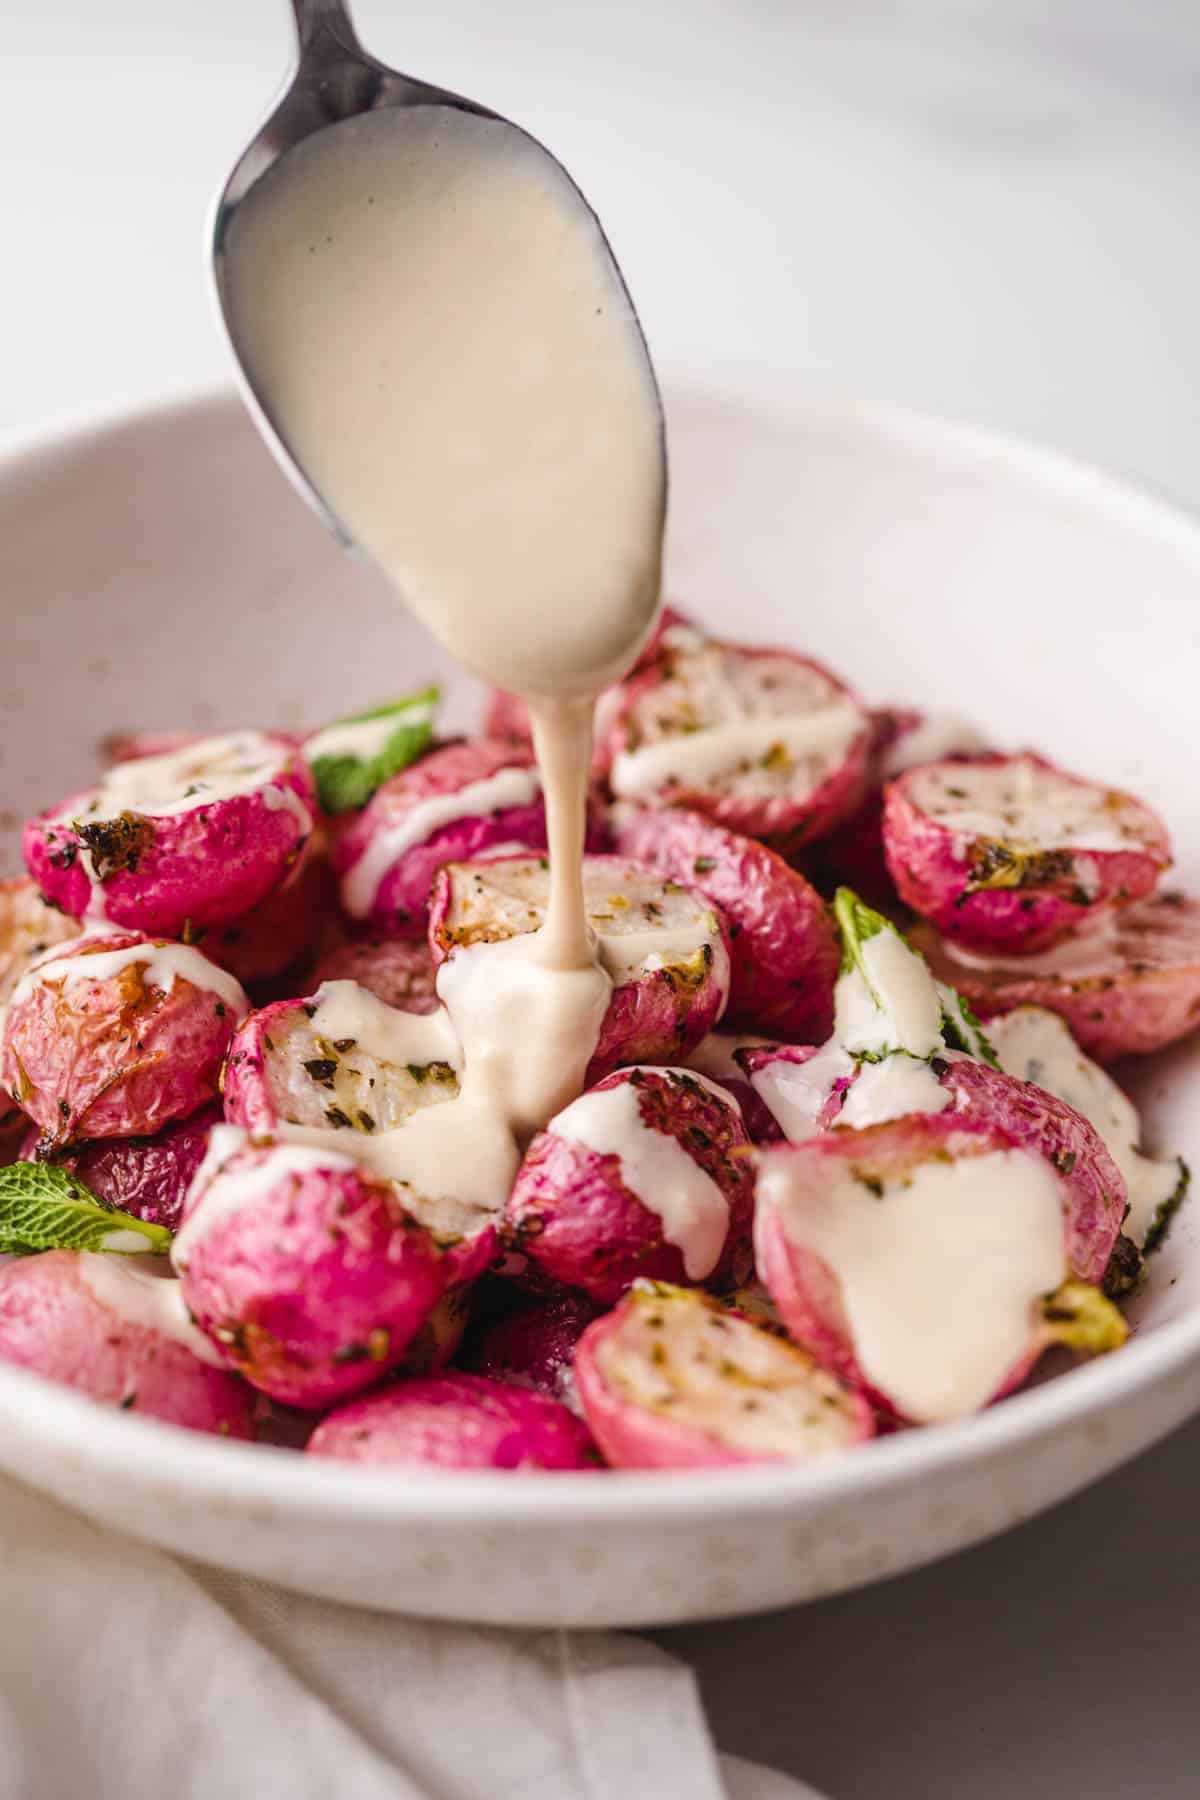 Drizzling creamy tahini sauce over roasted radishes